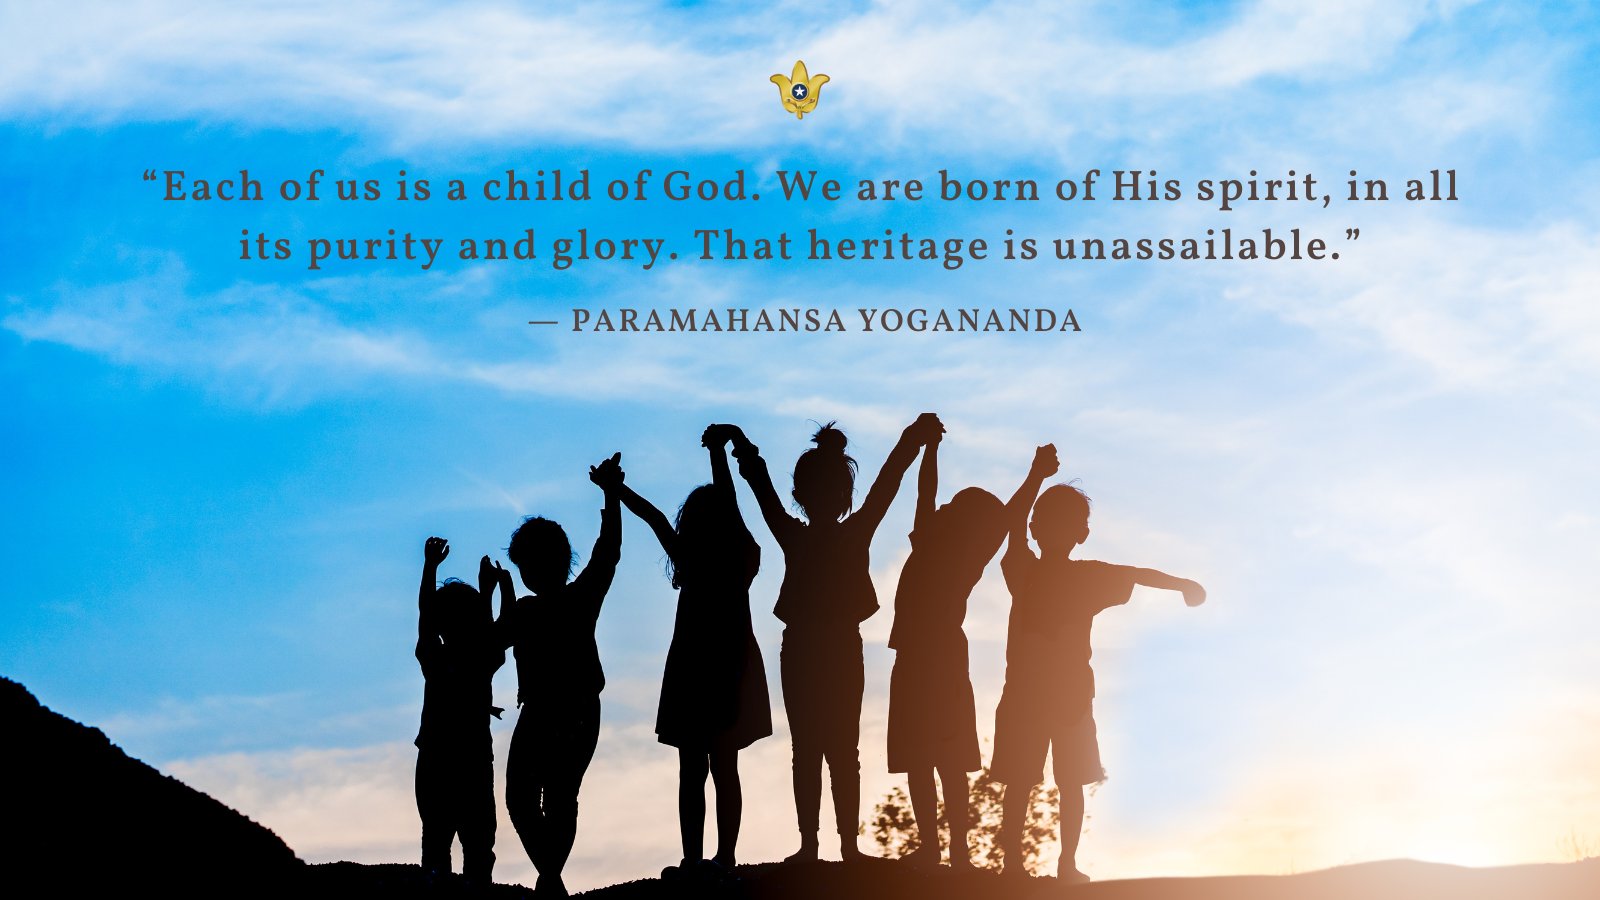 “Each of us is a child of God. We are born of His spirit, in all its purity and glory. That heritage is unassailable.” — Paramahansa Yogananda https://t.co/iBA6UAlEEH